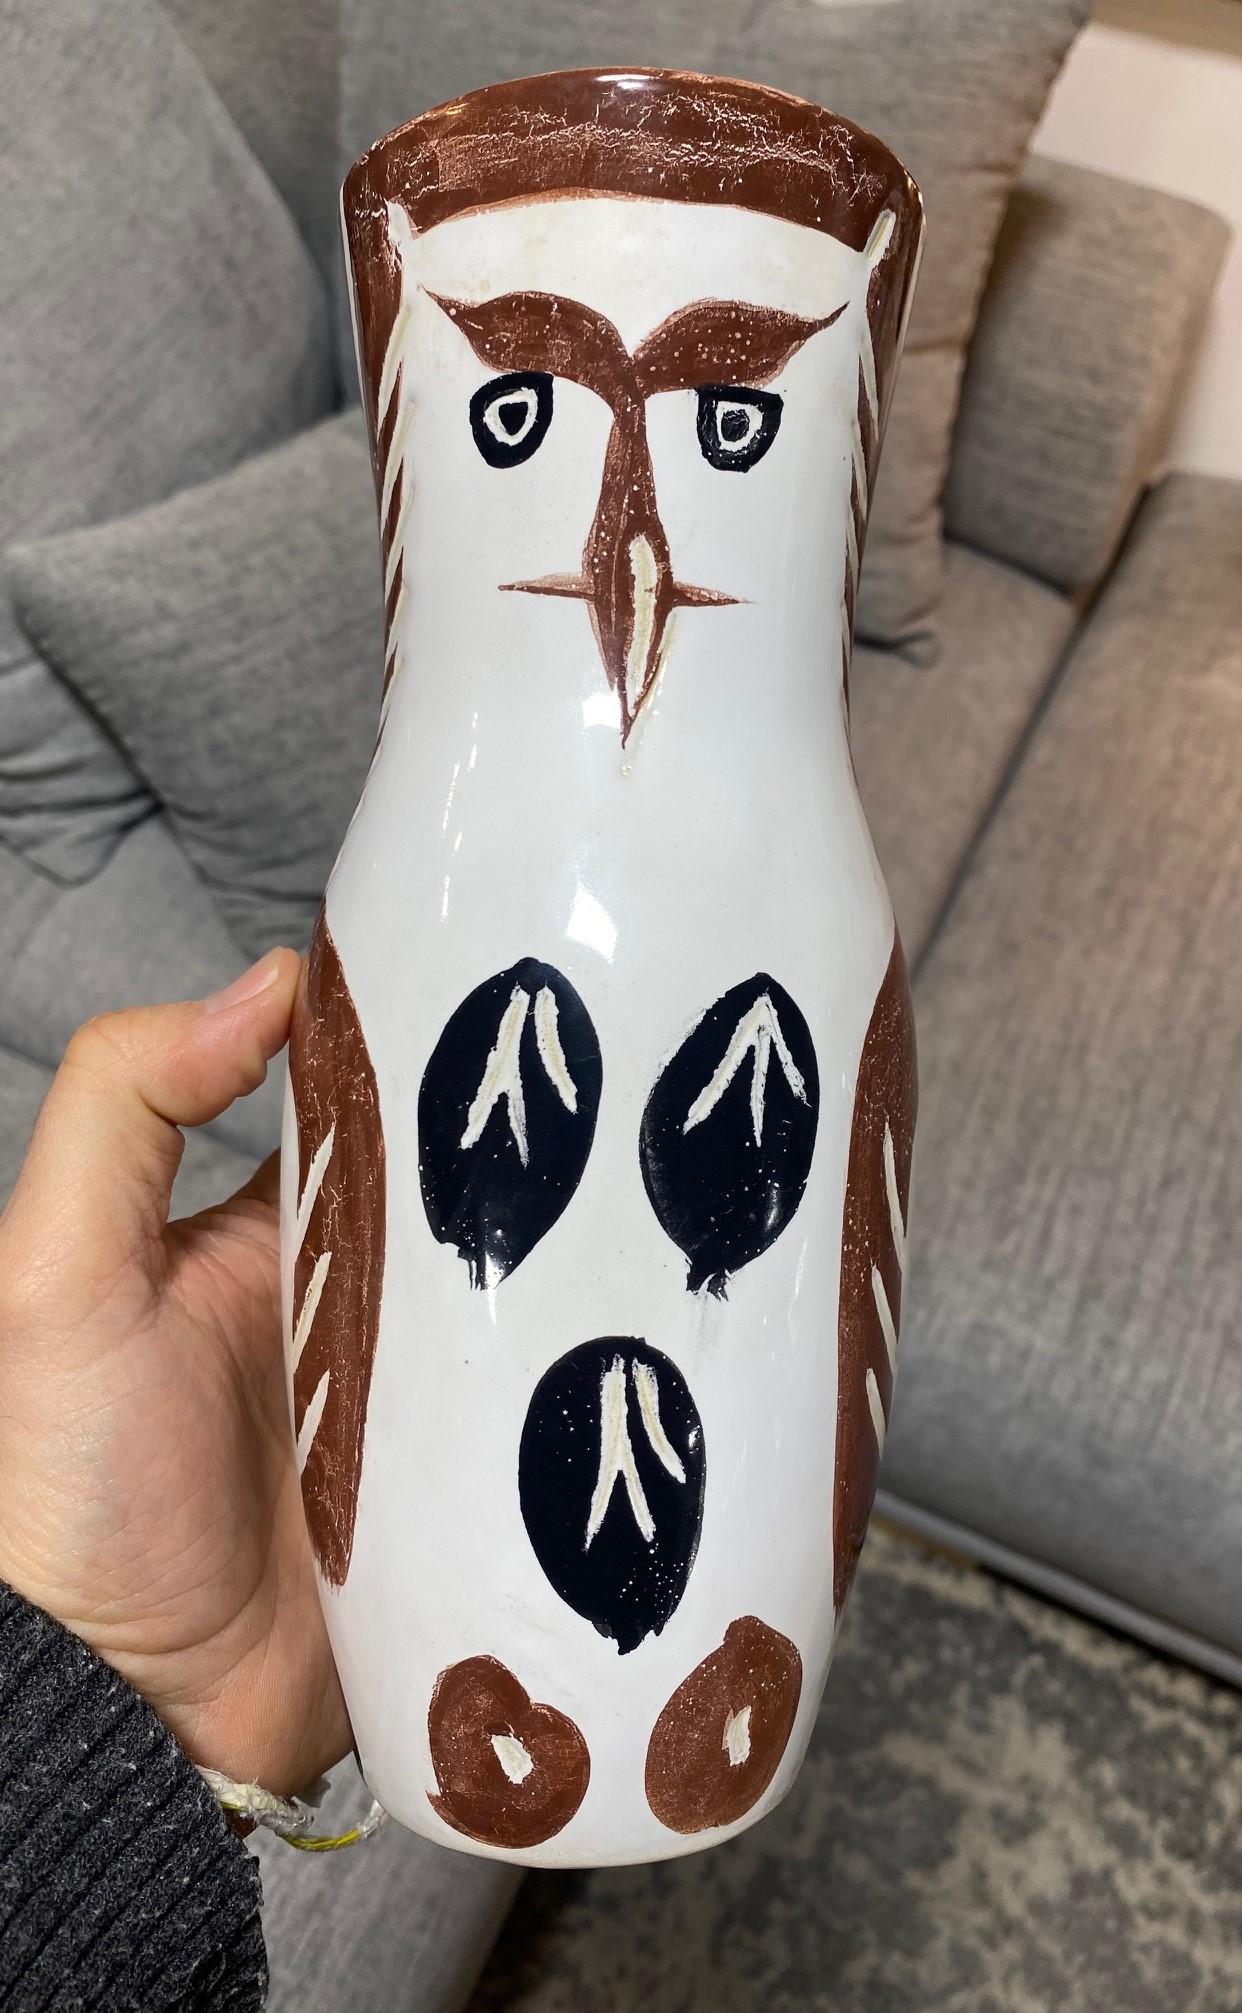 Pablo Picasso Signed Limited Madoura Pottery Chouetton Owl Vase A.R. 135, 1952 For Sale 5